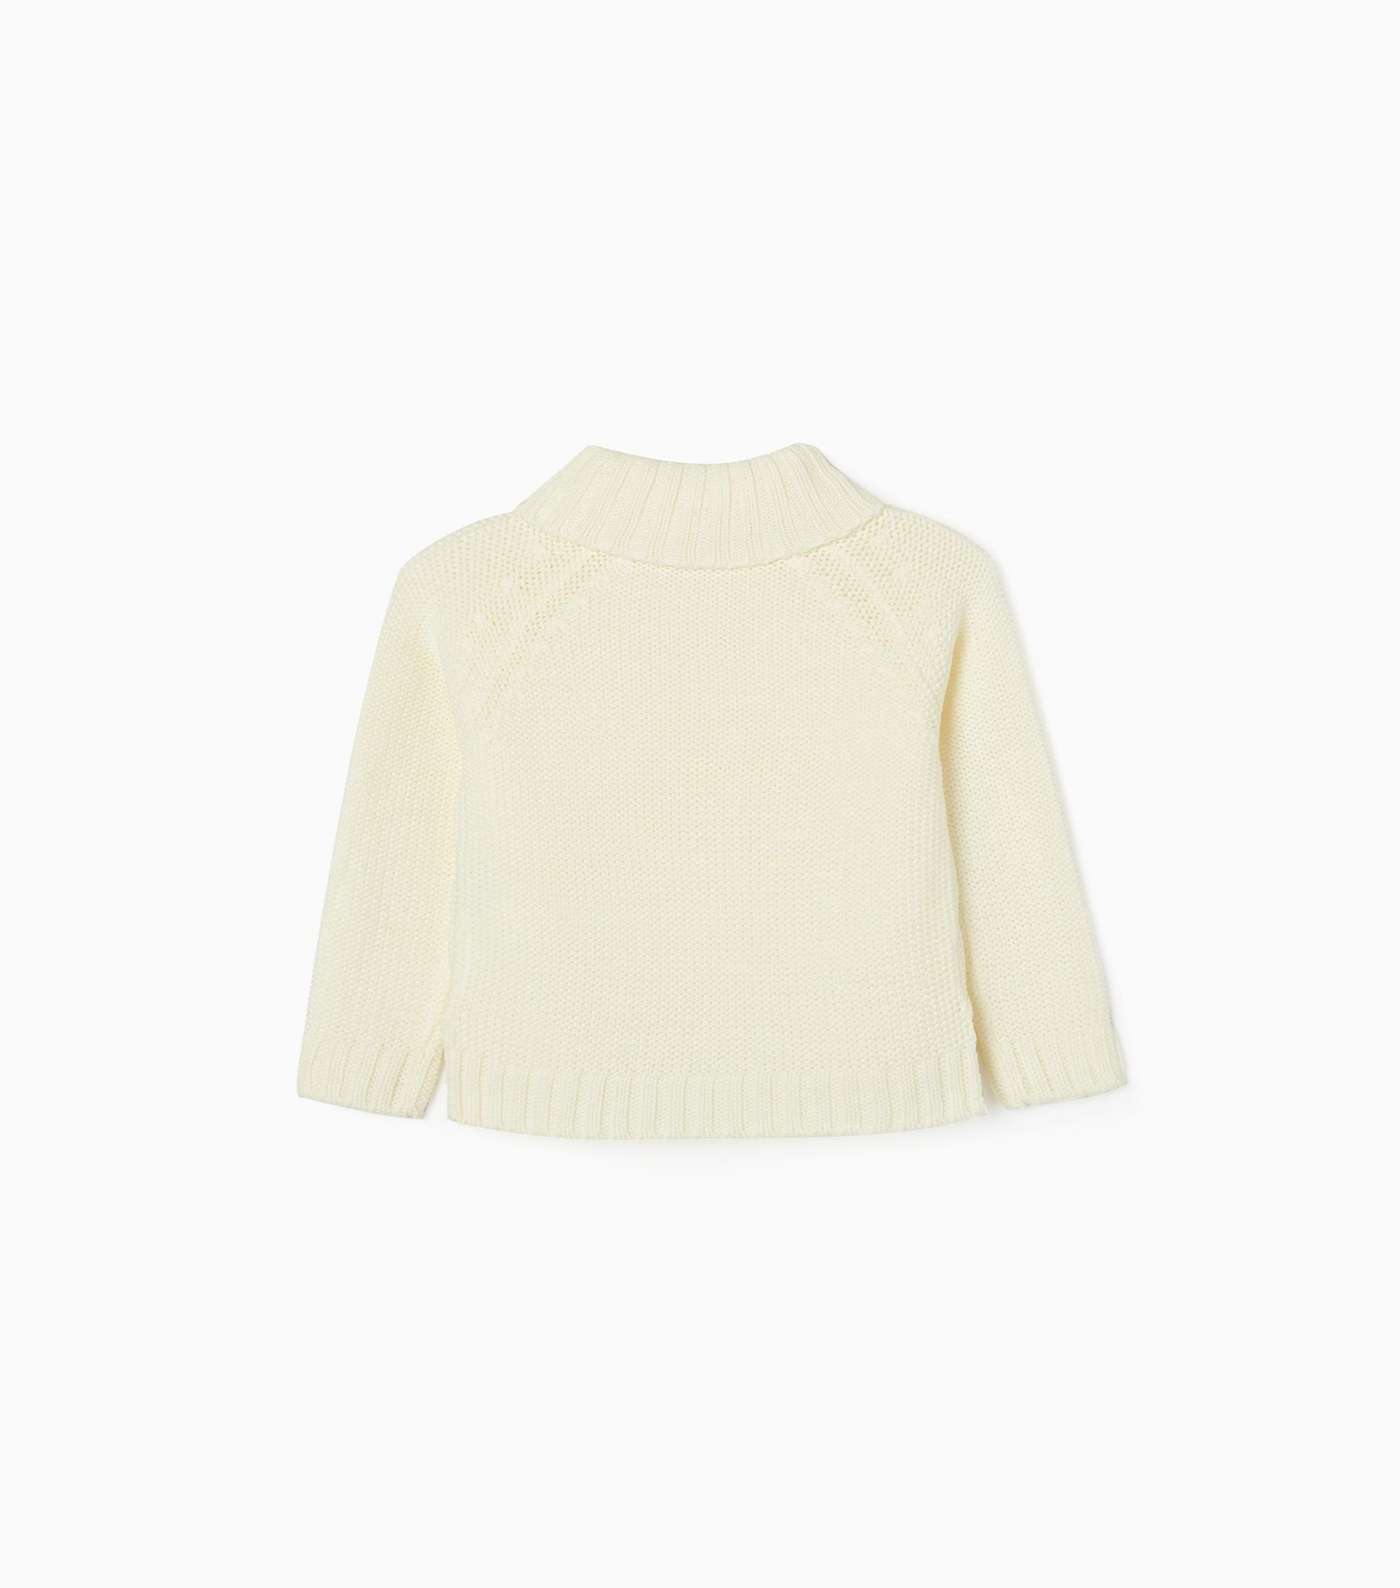 Zippy White Chunky Cable Knit Jumper Image 2